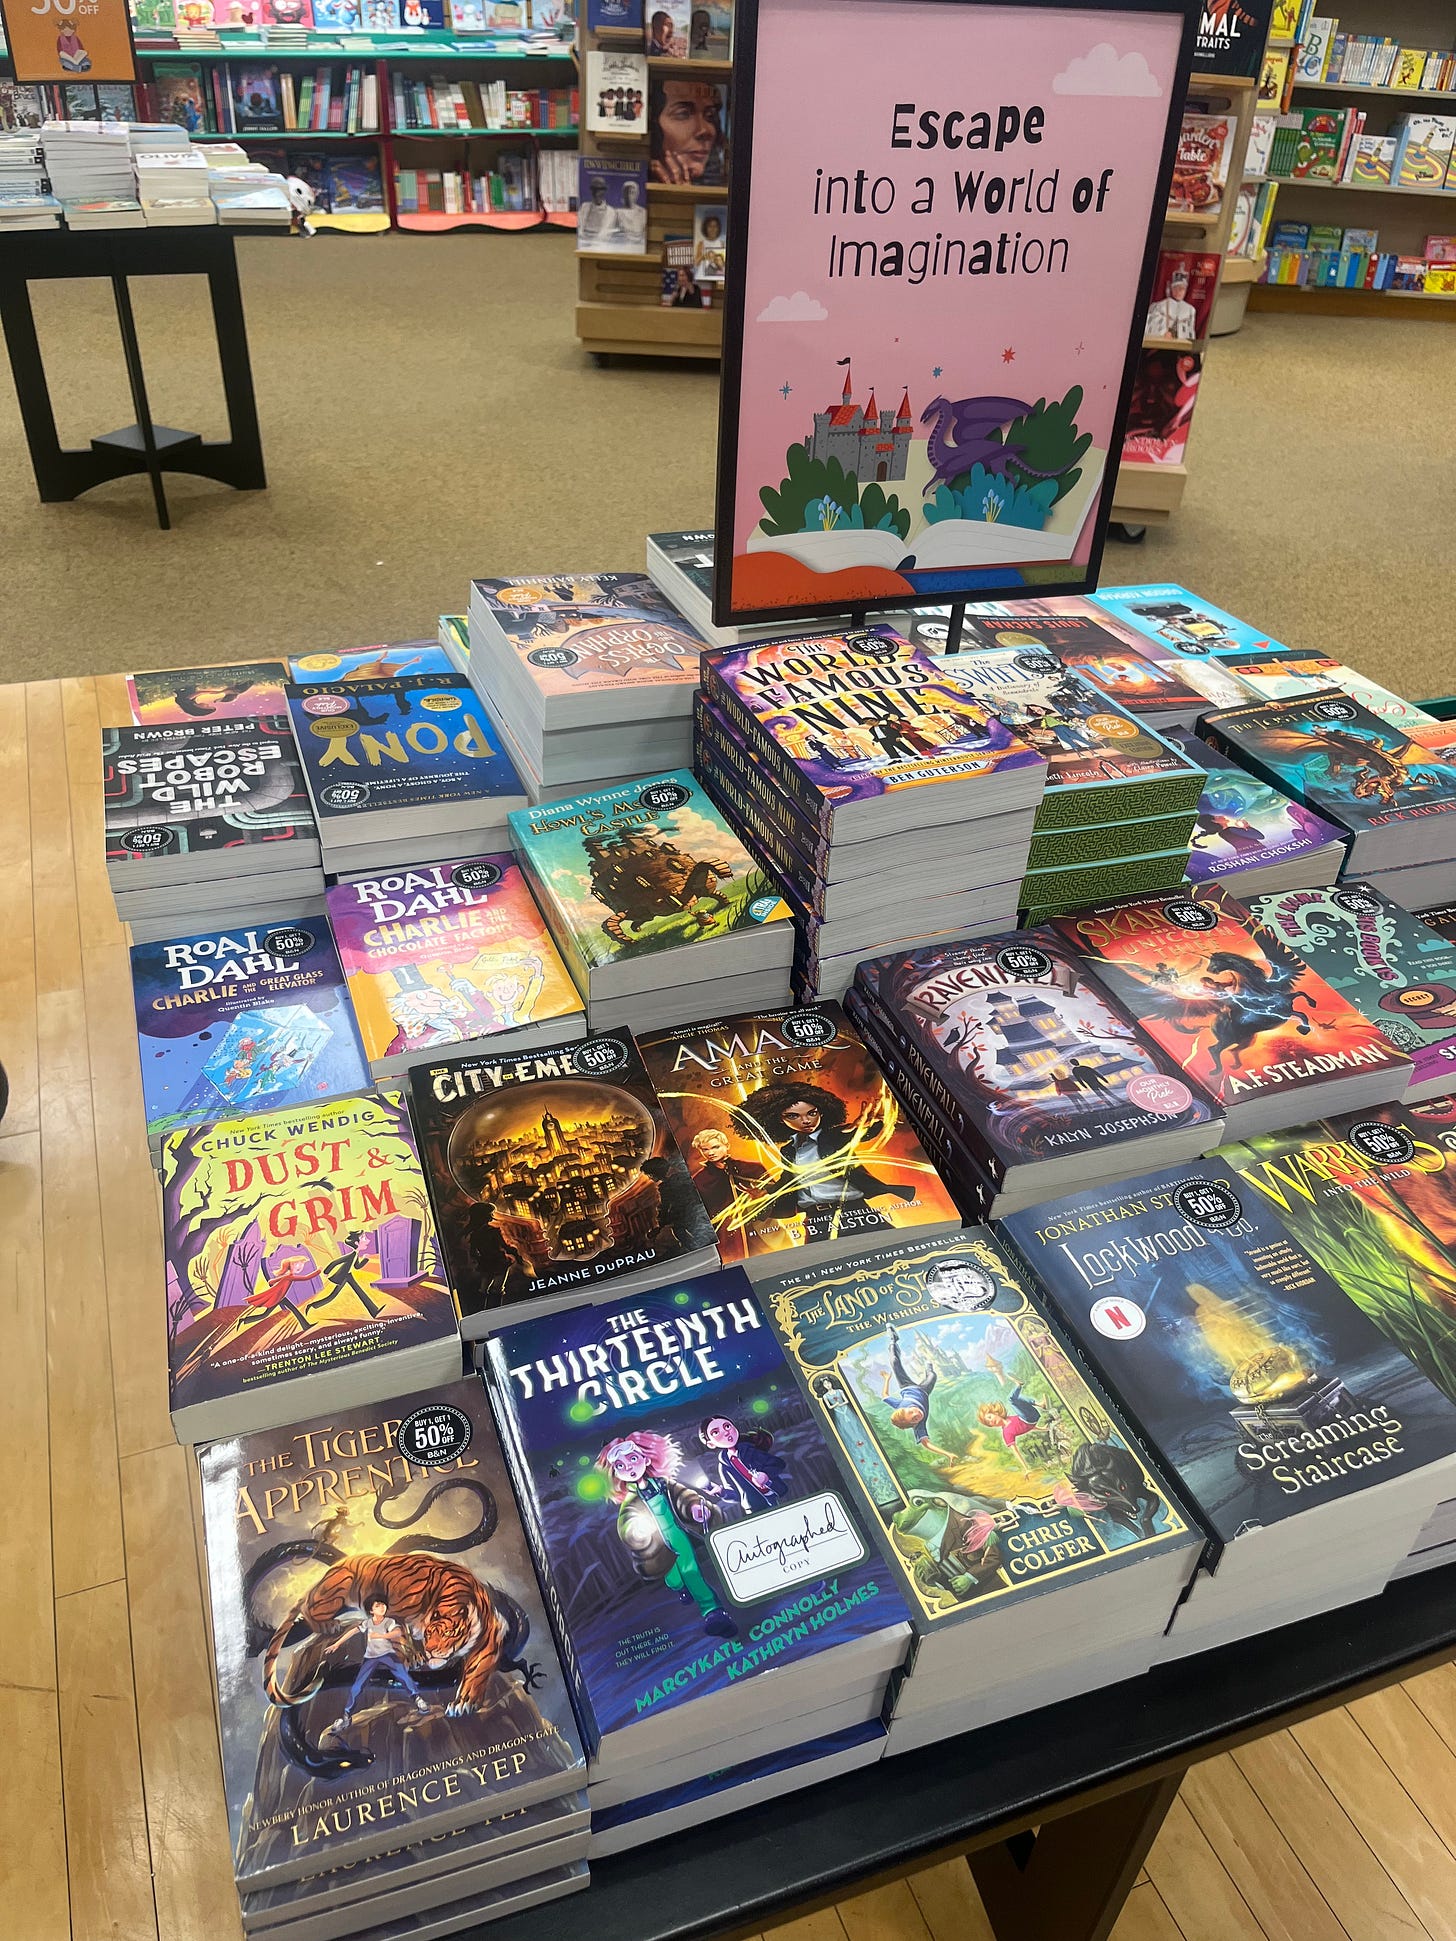 A selection of middle-grade books, including The Thirteenth Circle, on a display table at Barnes & Noble.